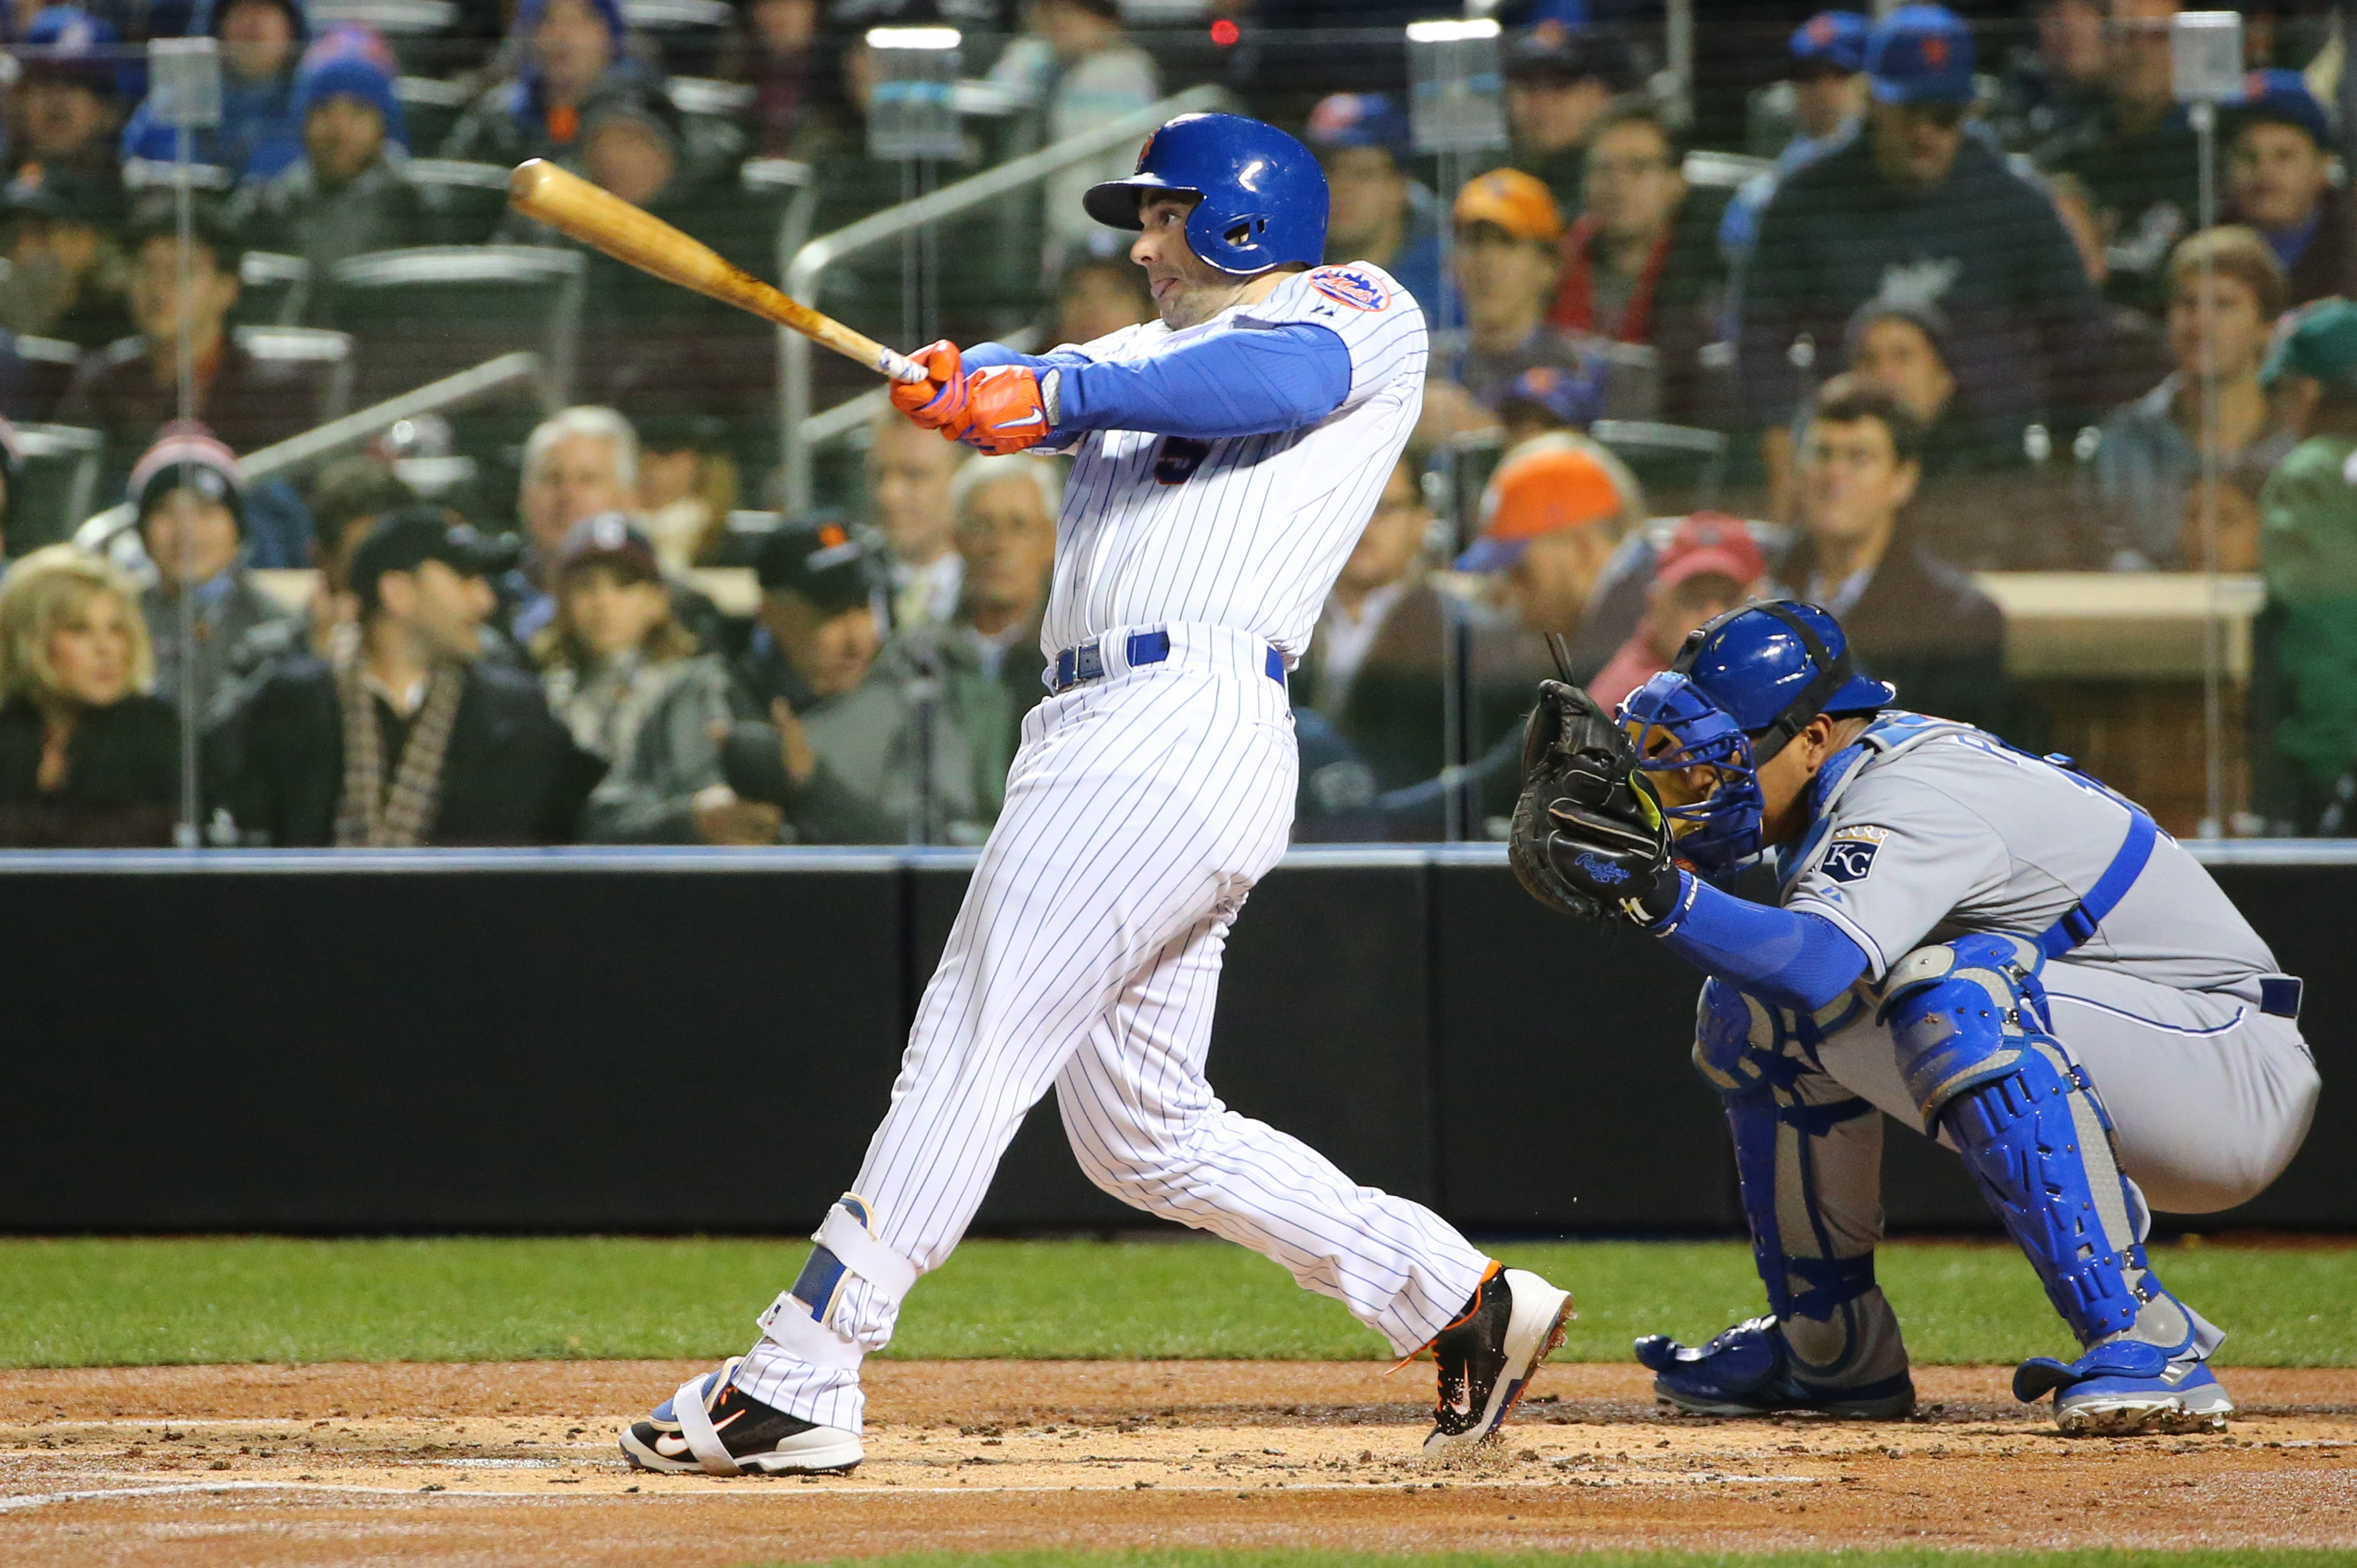 This delightful story about David Wright's final at-bat will make your day